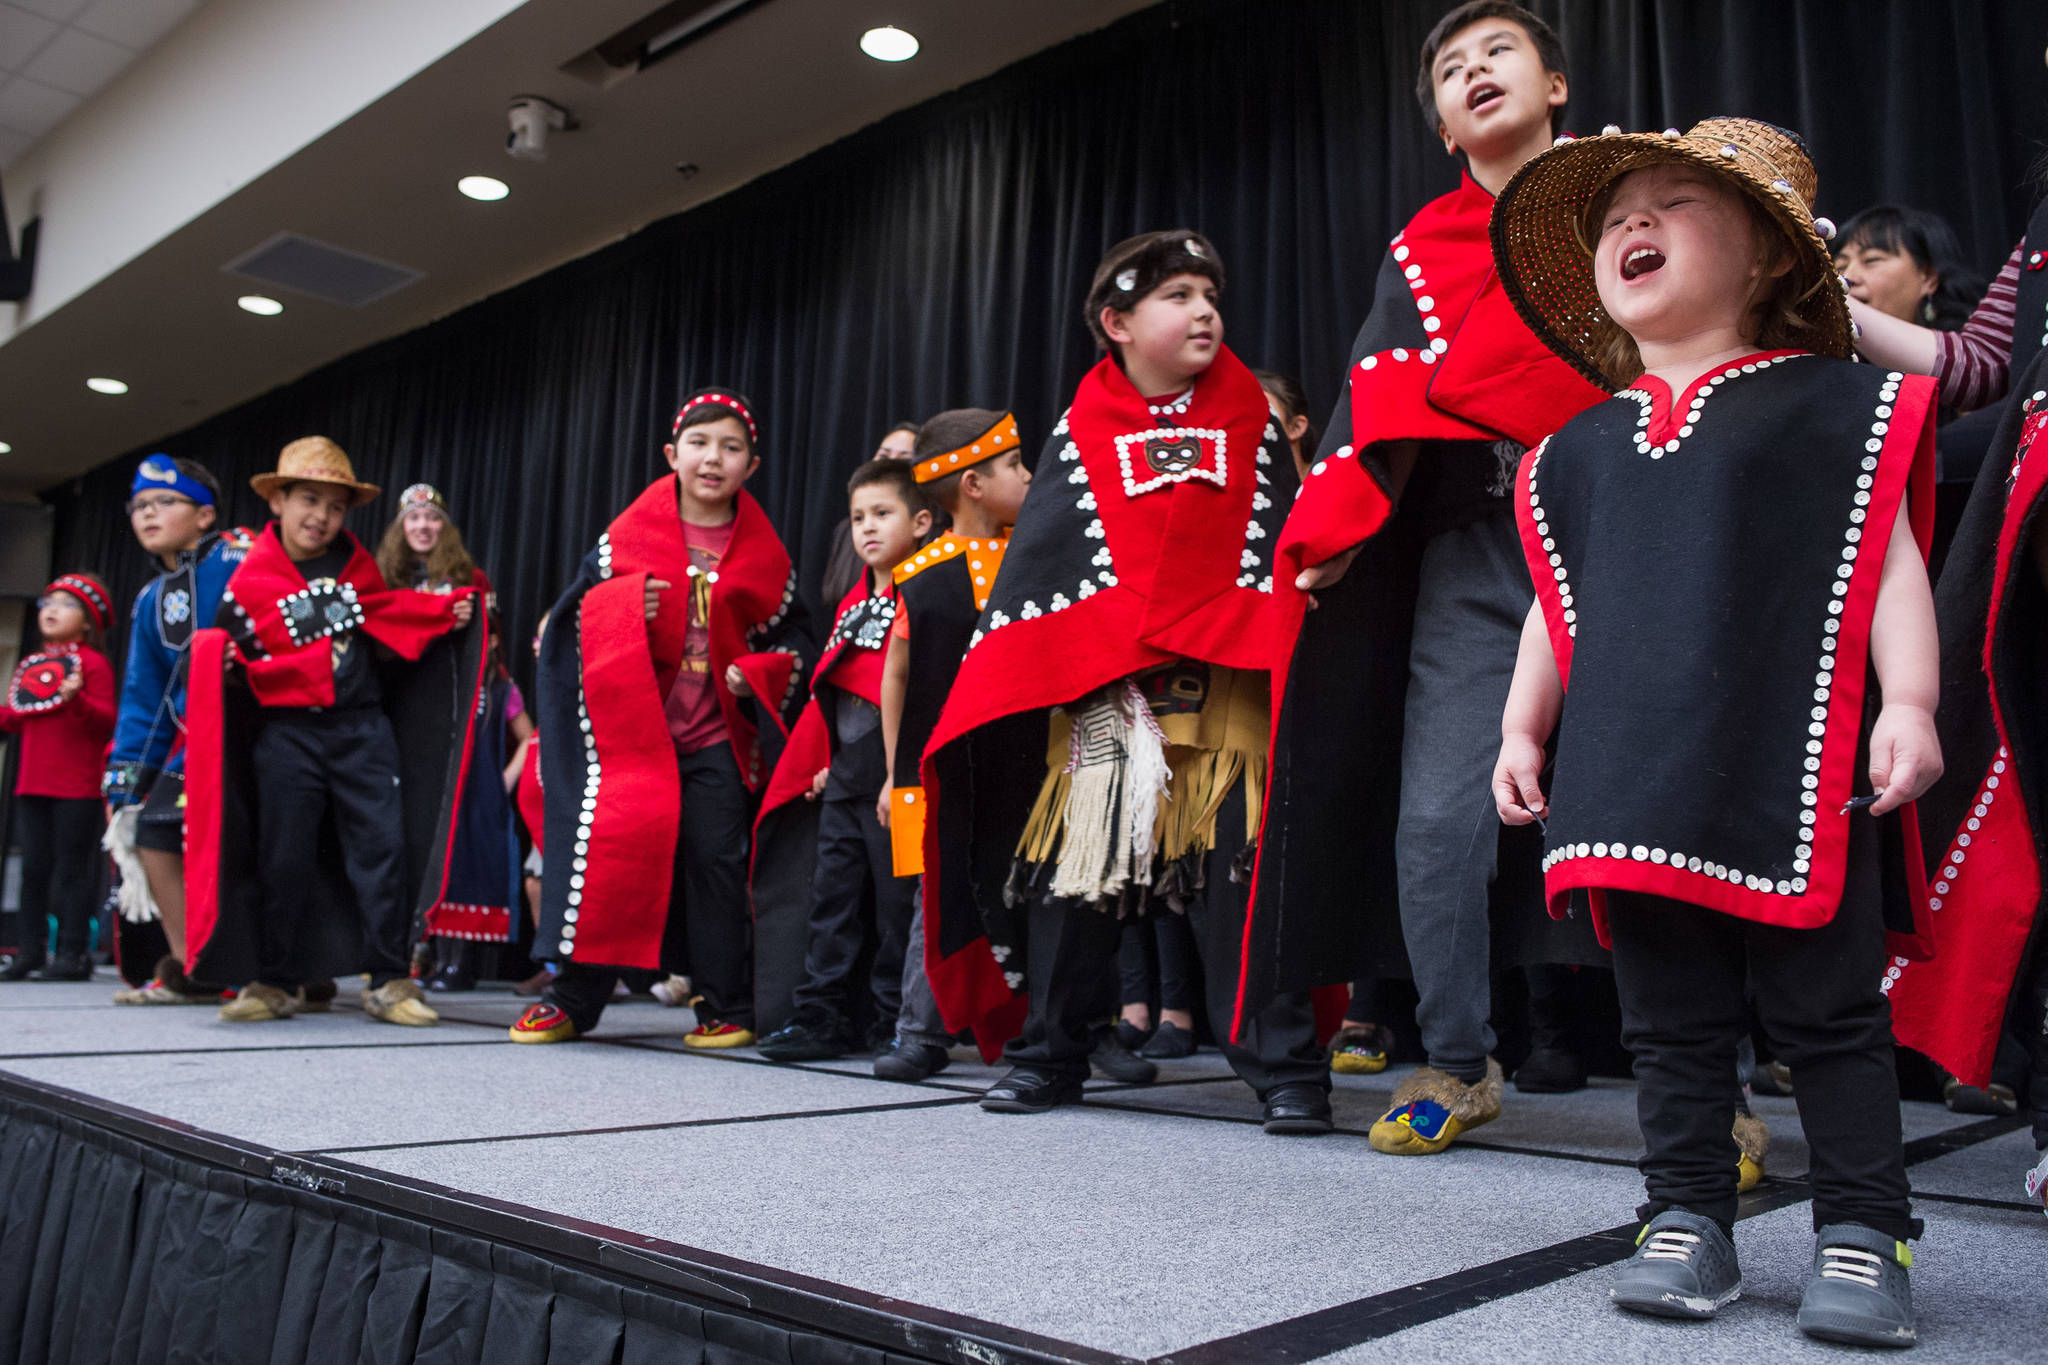 Natalie Soto, 2, helps sing with the All Nations Children Dancers as Juneau residents celebrate Indigenous Peoples Day at Elizabeth Peratrovich Hall on Monday, Oct. 9, 2017. (Michael Penn | Juneau Empire File)